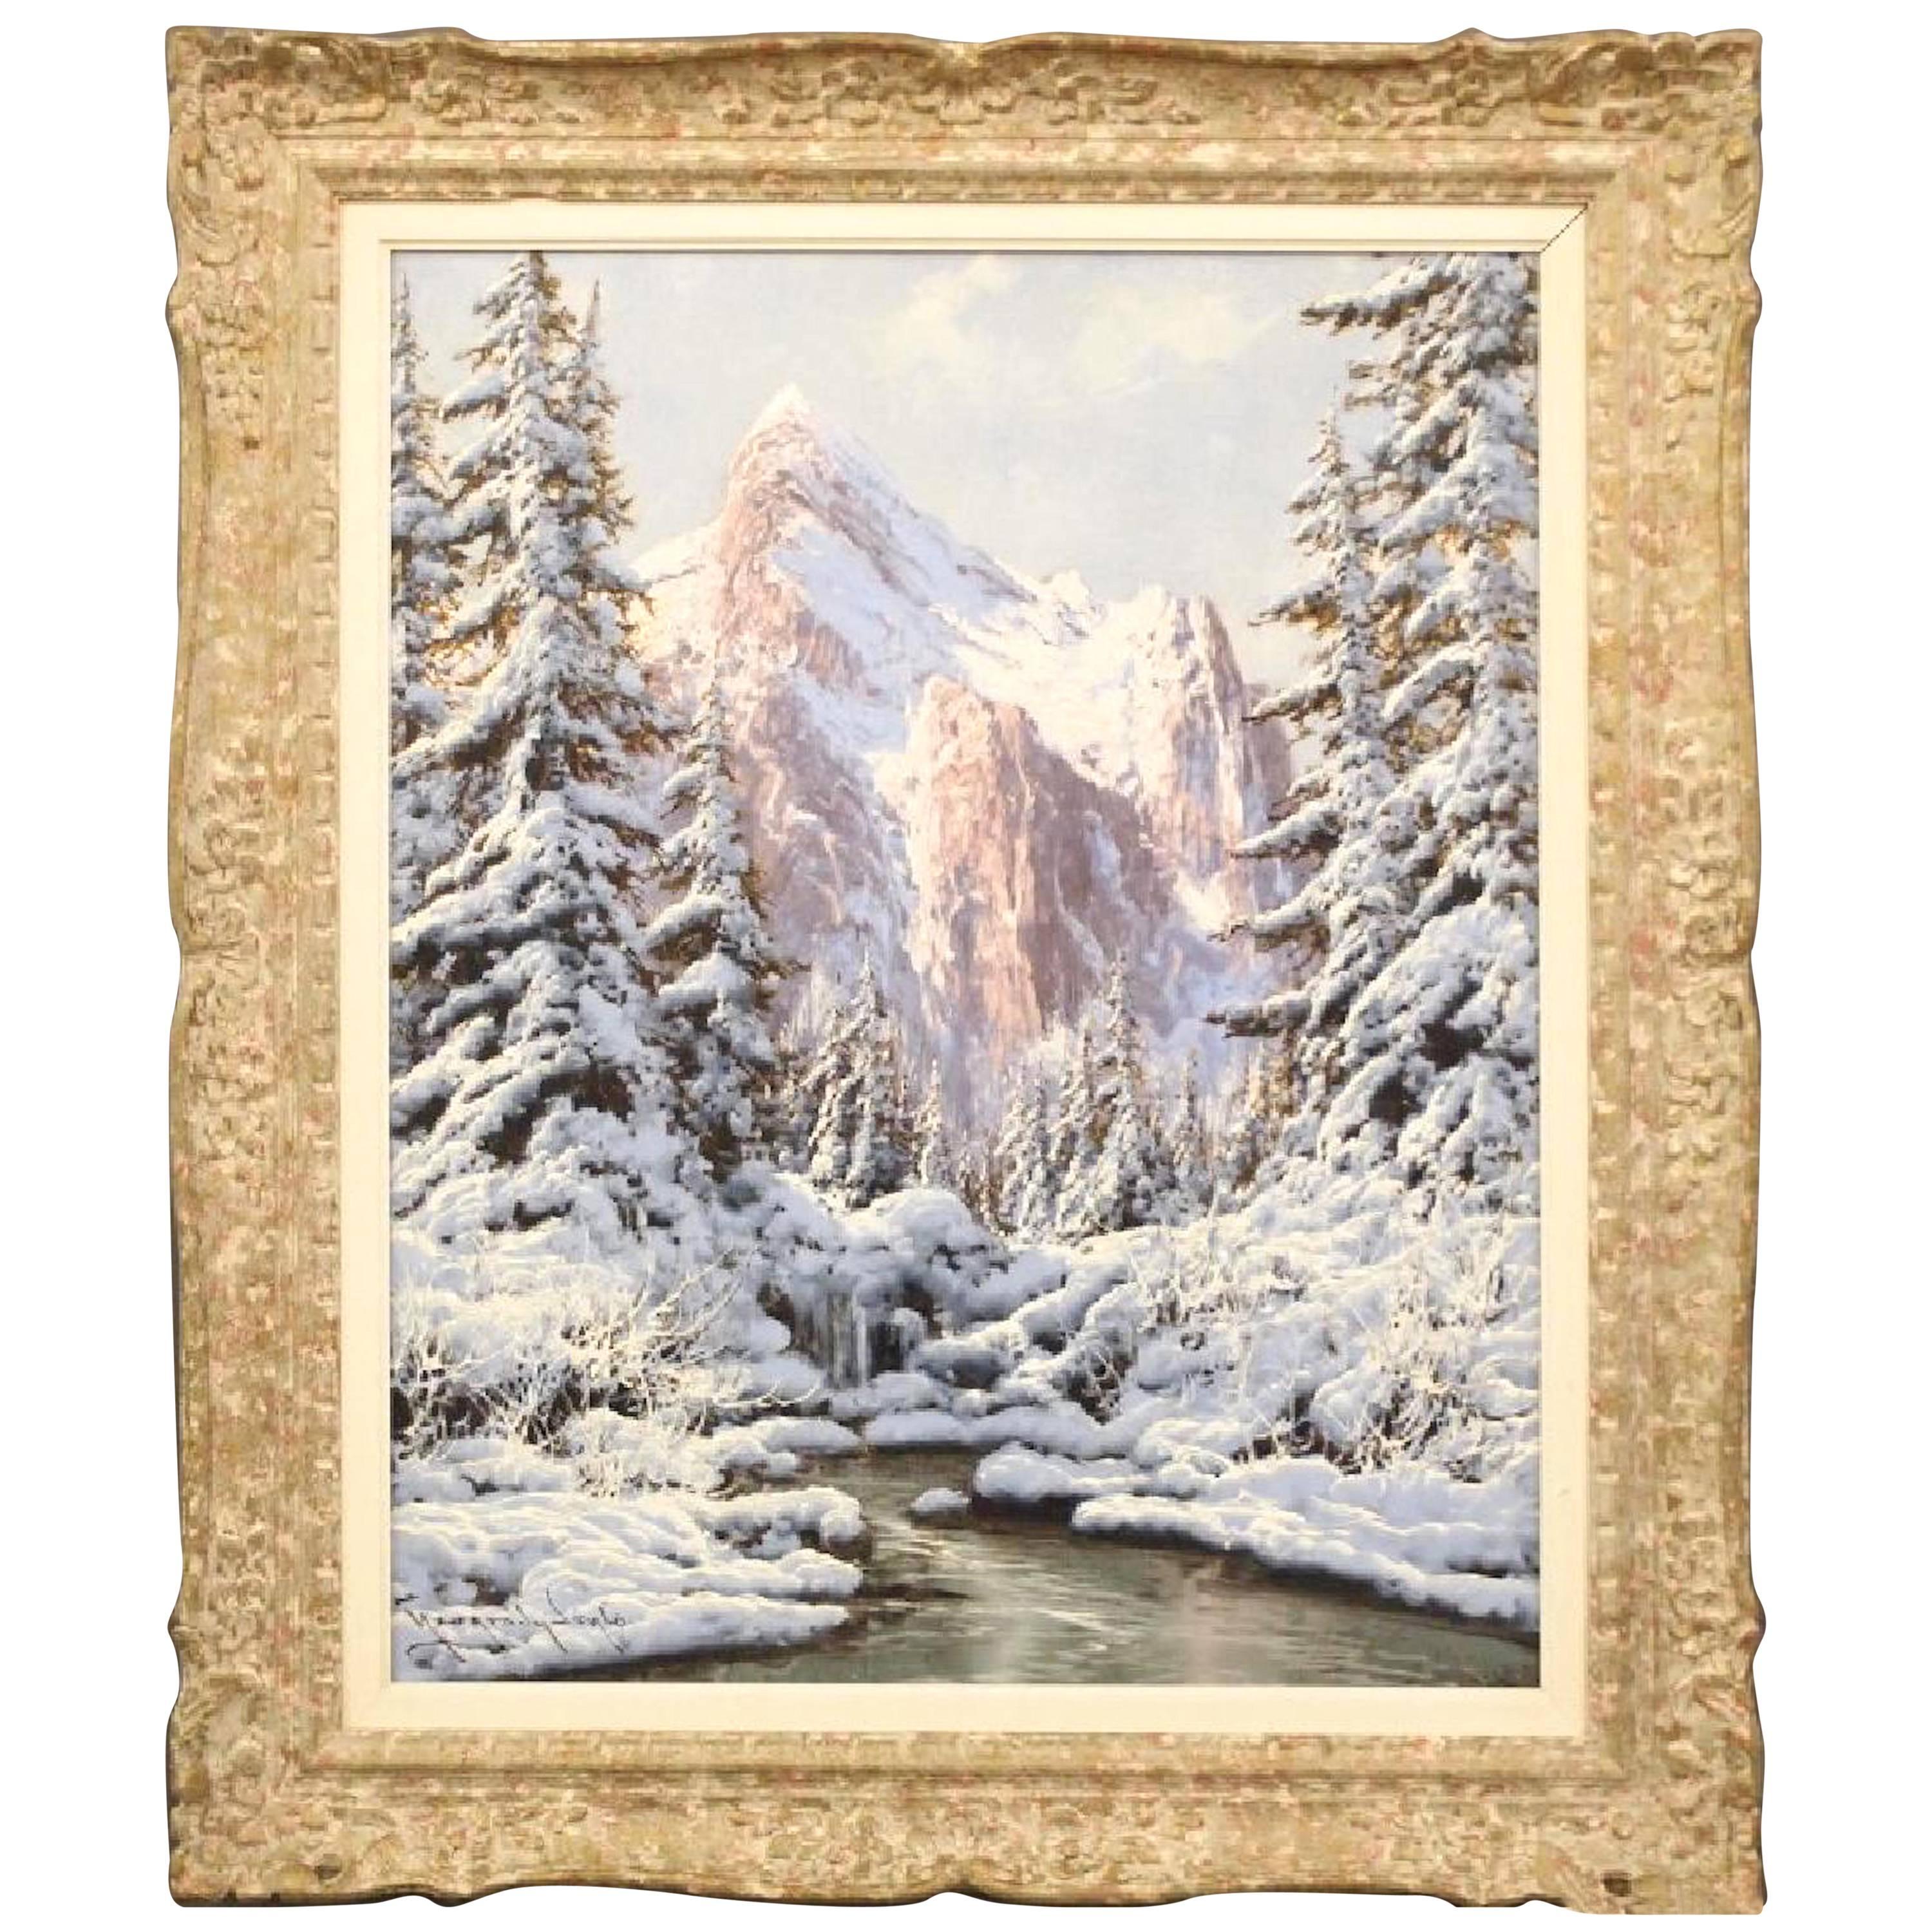 "Winter in the Alps" Painting by Lazlo Neogrady